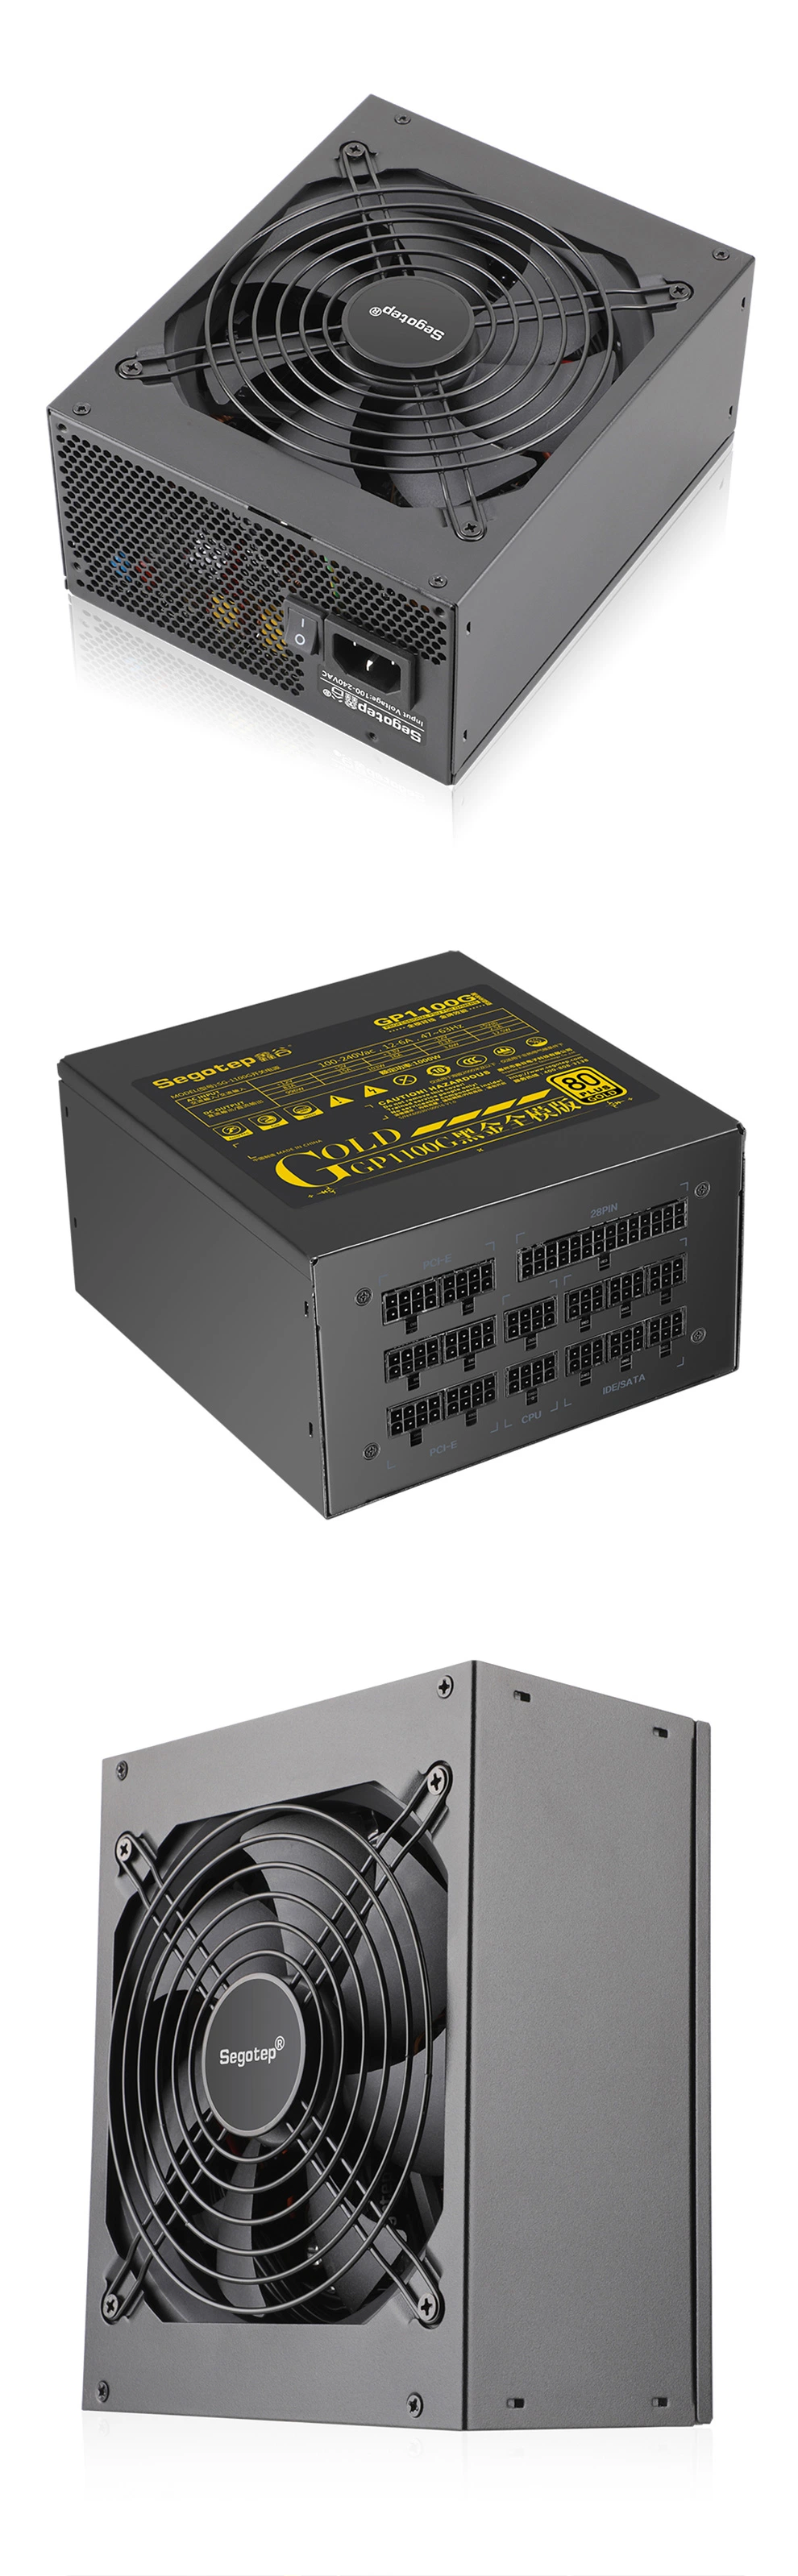 Mining Cryptocurrency Bitcoin Switching ATX 1000W Power Supply Suitable for Asic Chip Miner